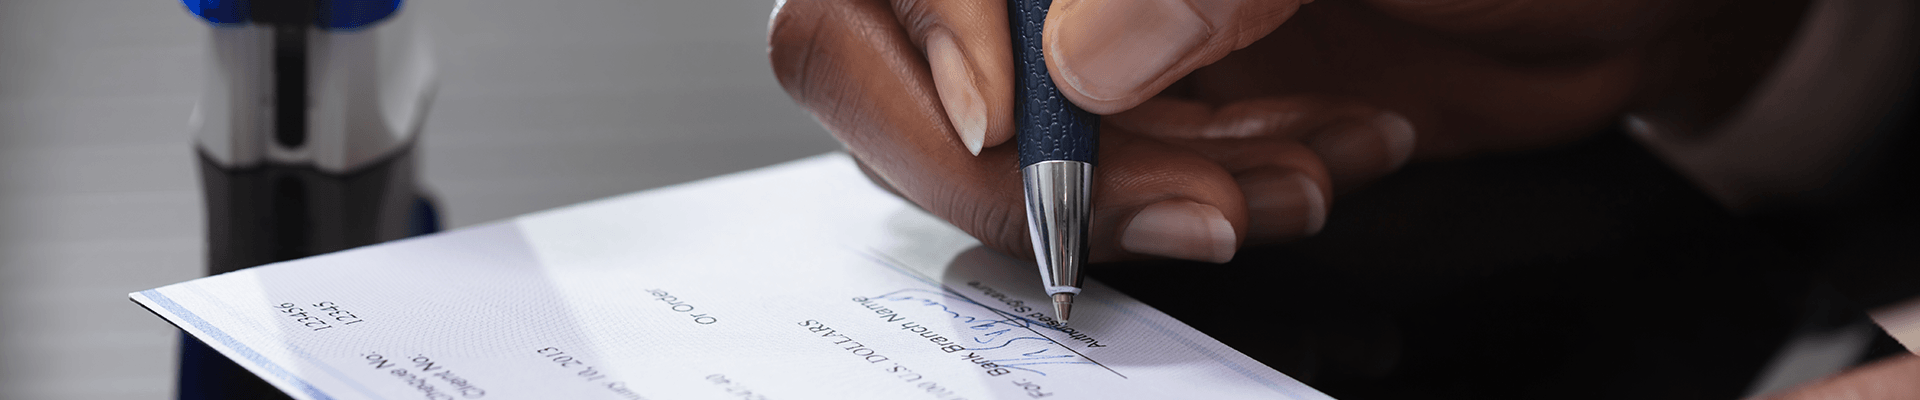 writing a personal check